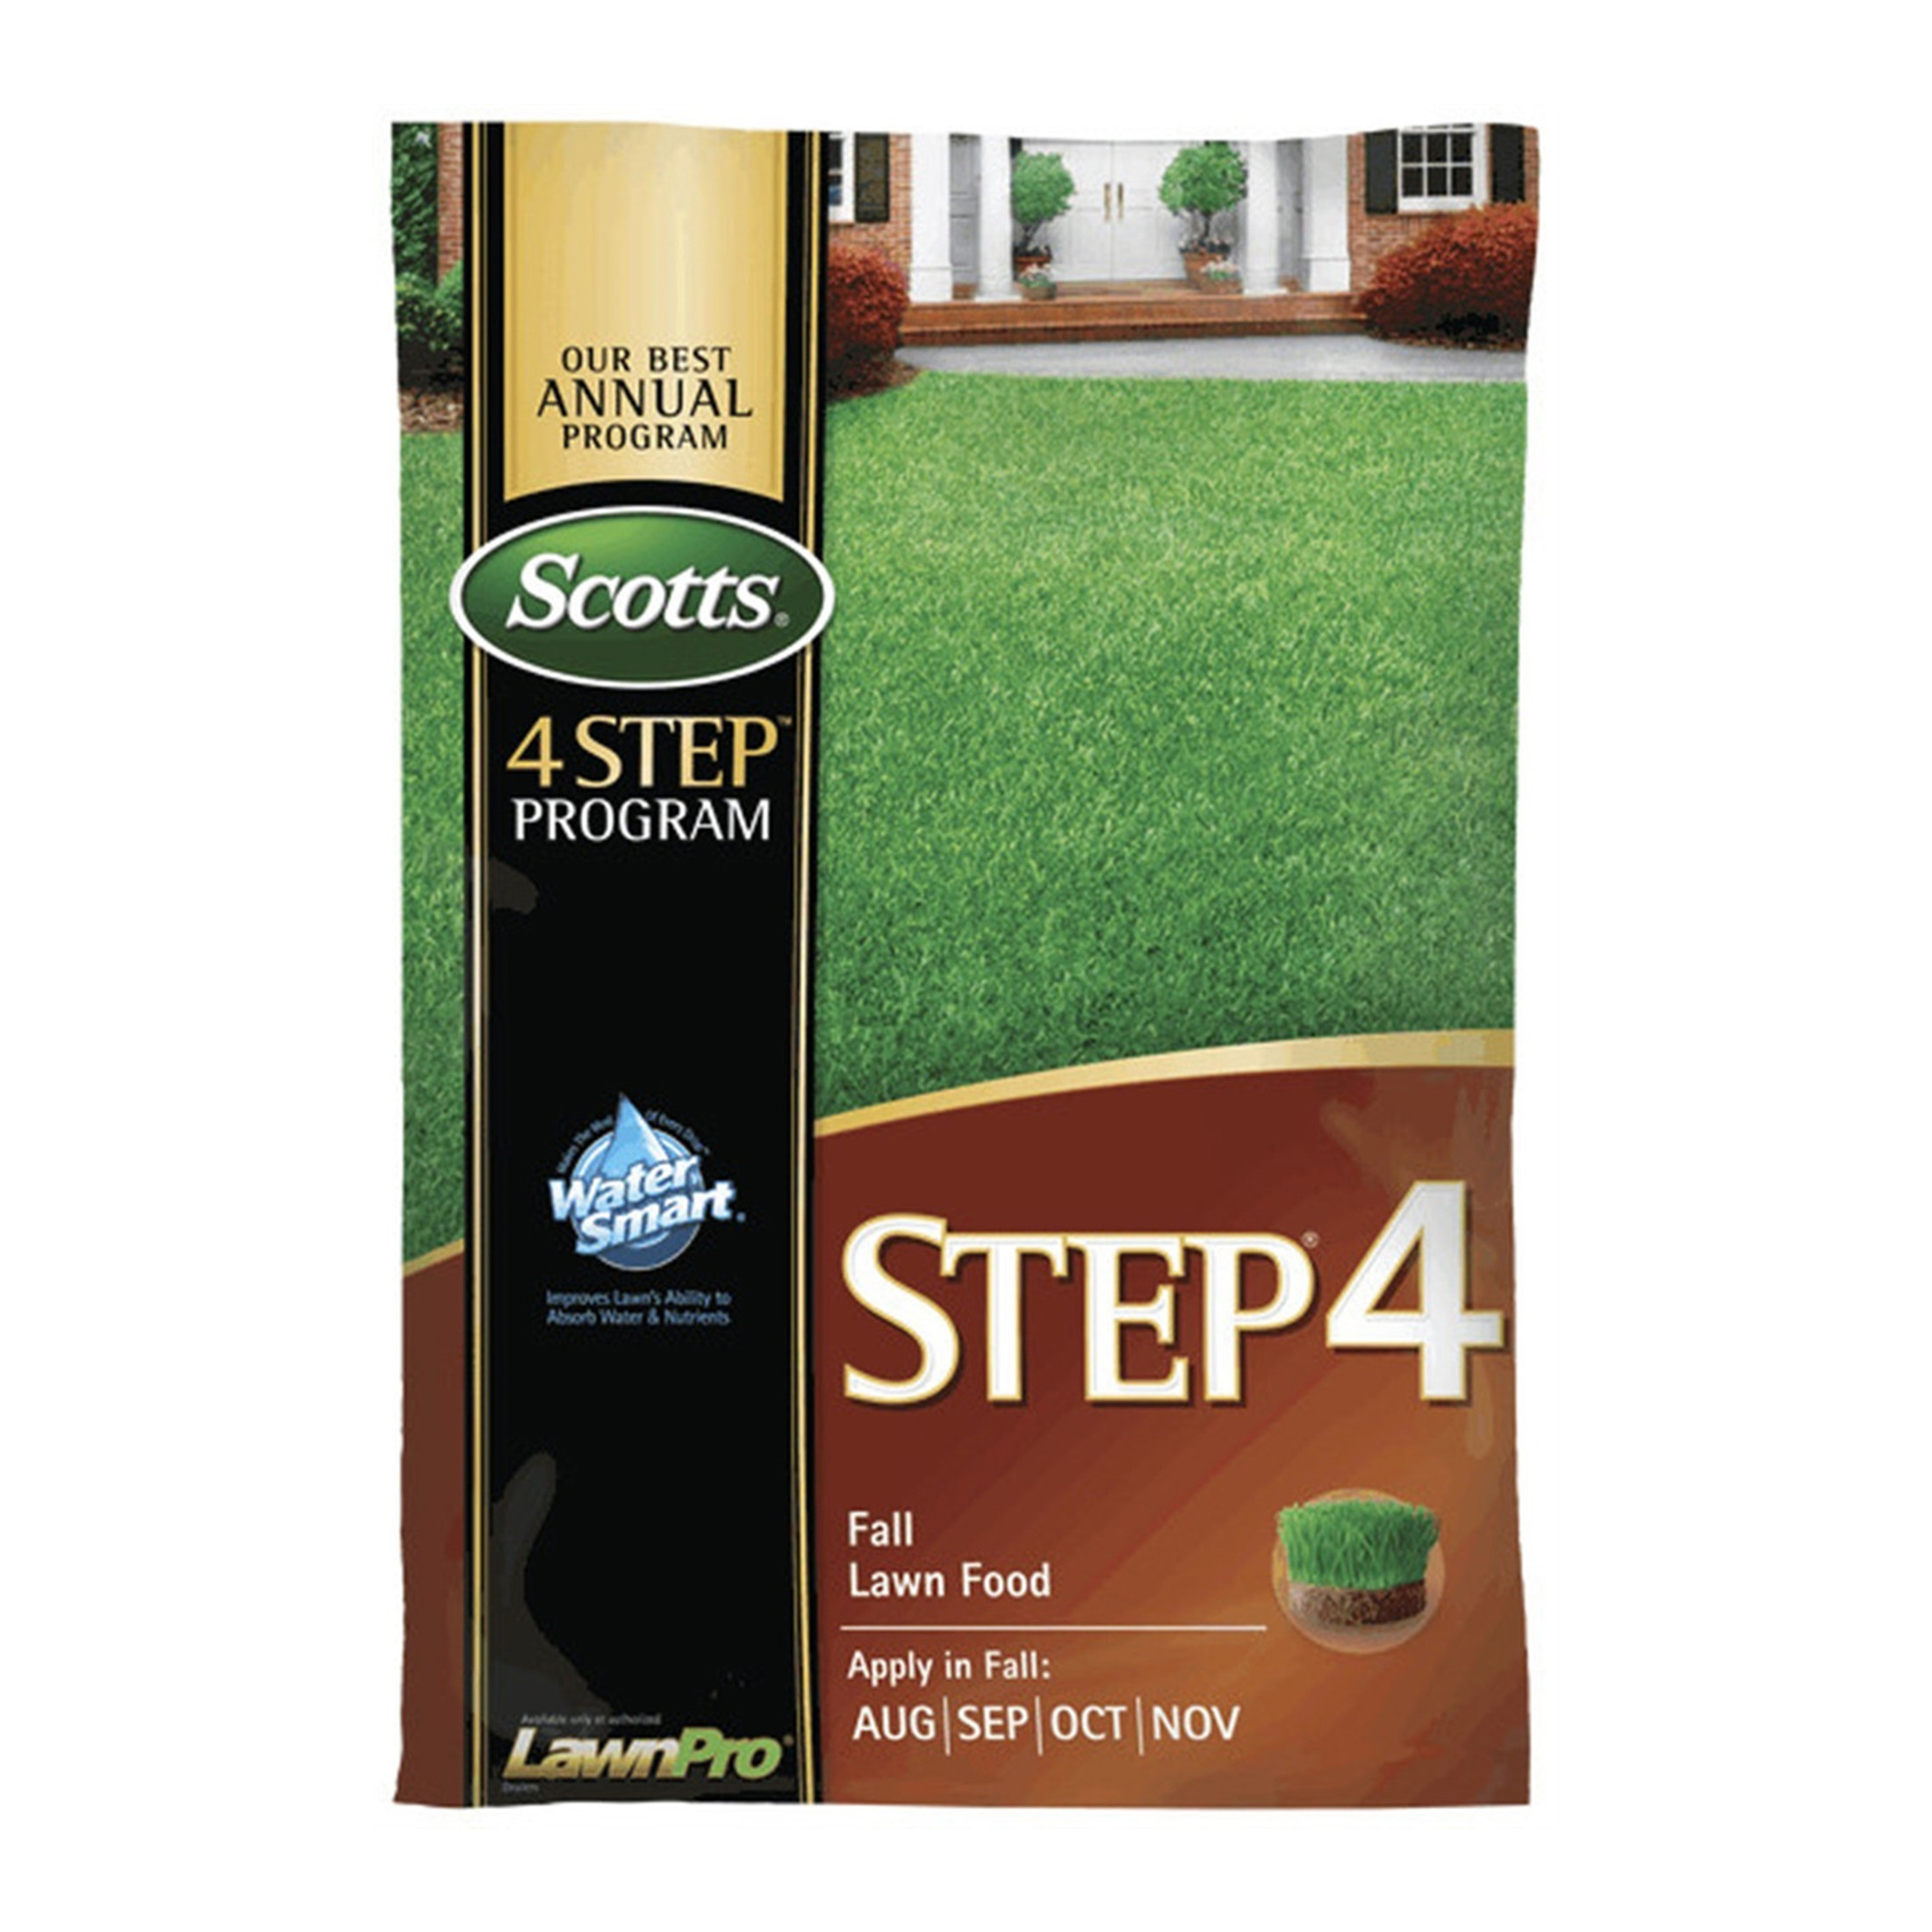 Scotts STEP 4 Fall Lawn Food, 5,000 Sq. Ft. (Repaired Bag)